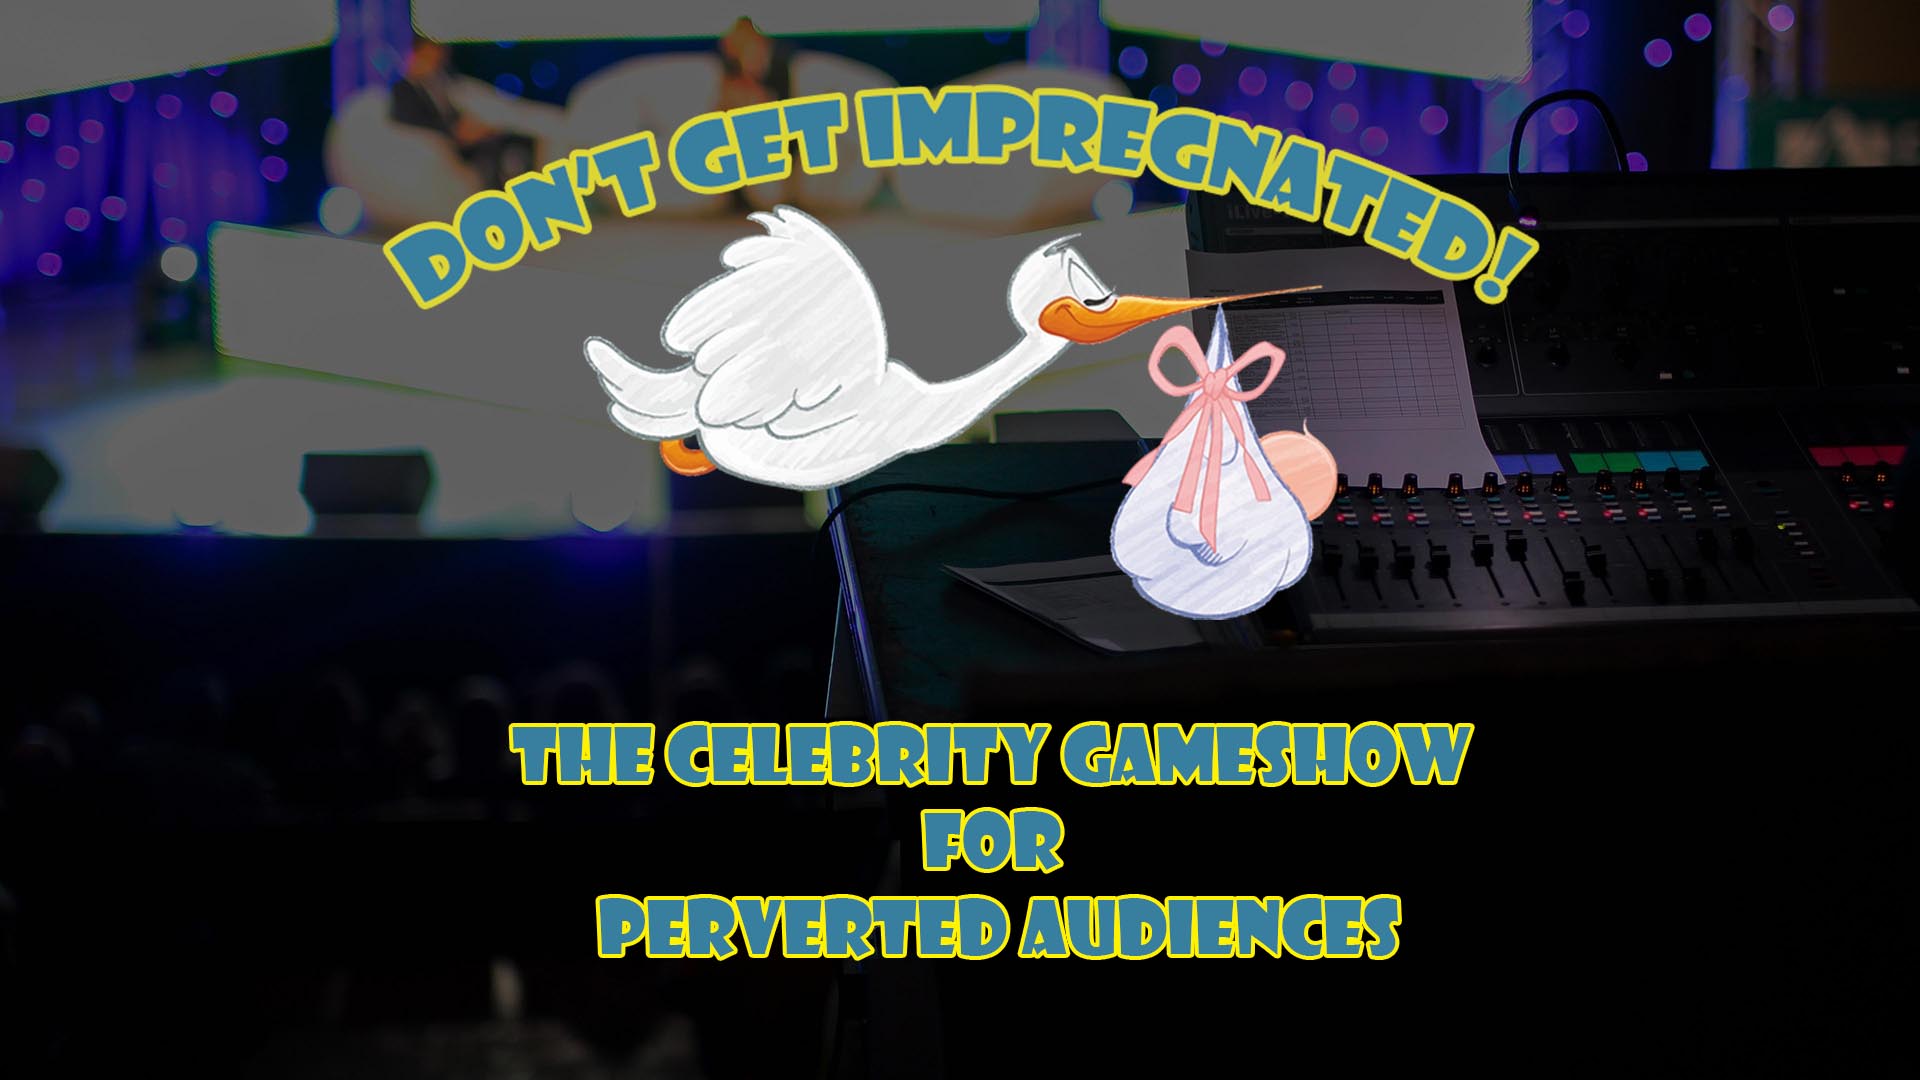 Don't Get Impregnated - The Celebrity Gameshow for Perverted Audiences